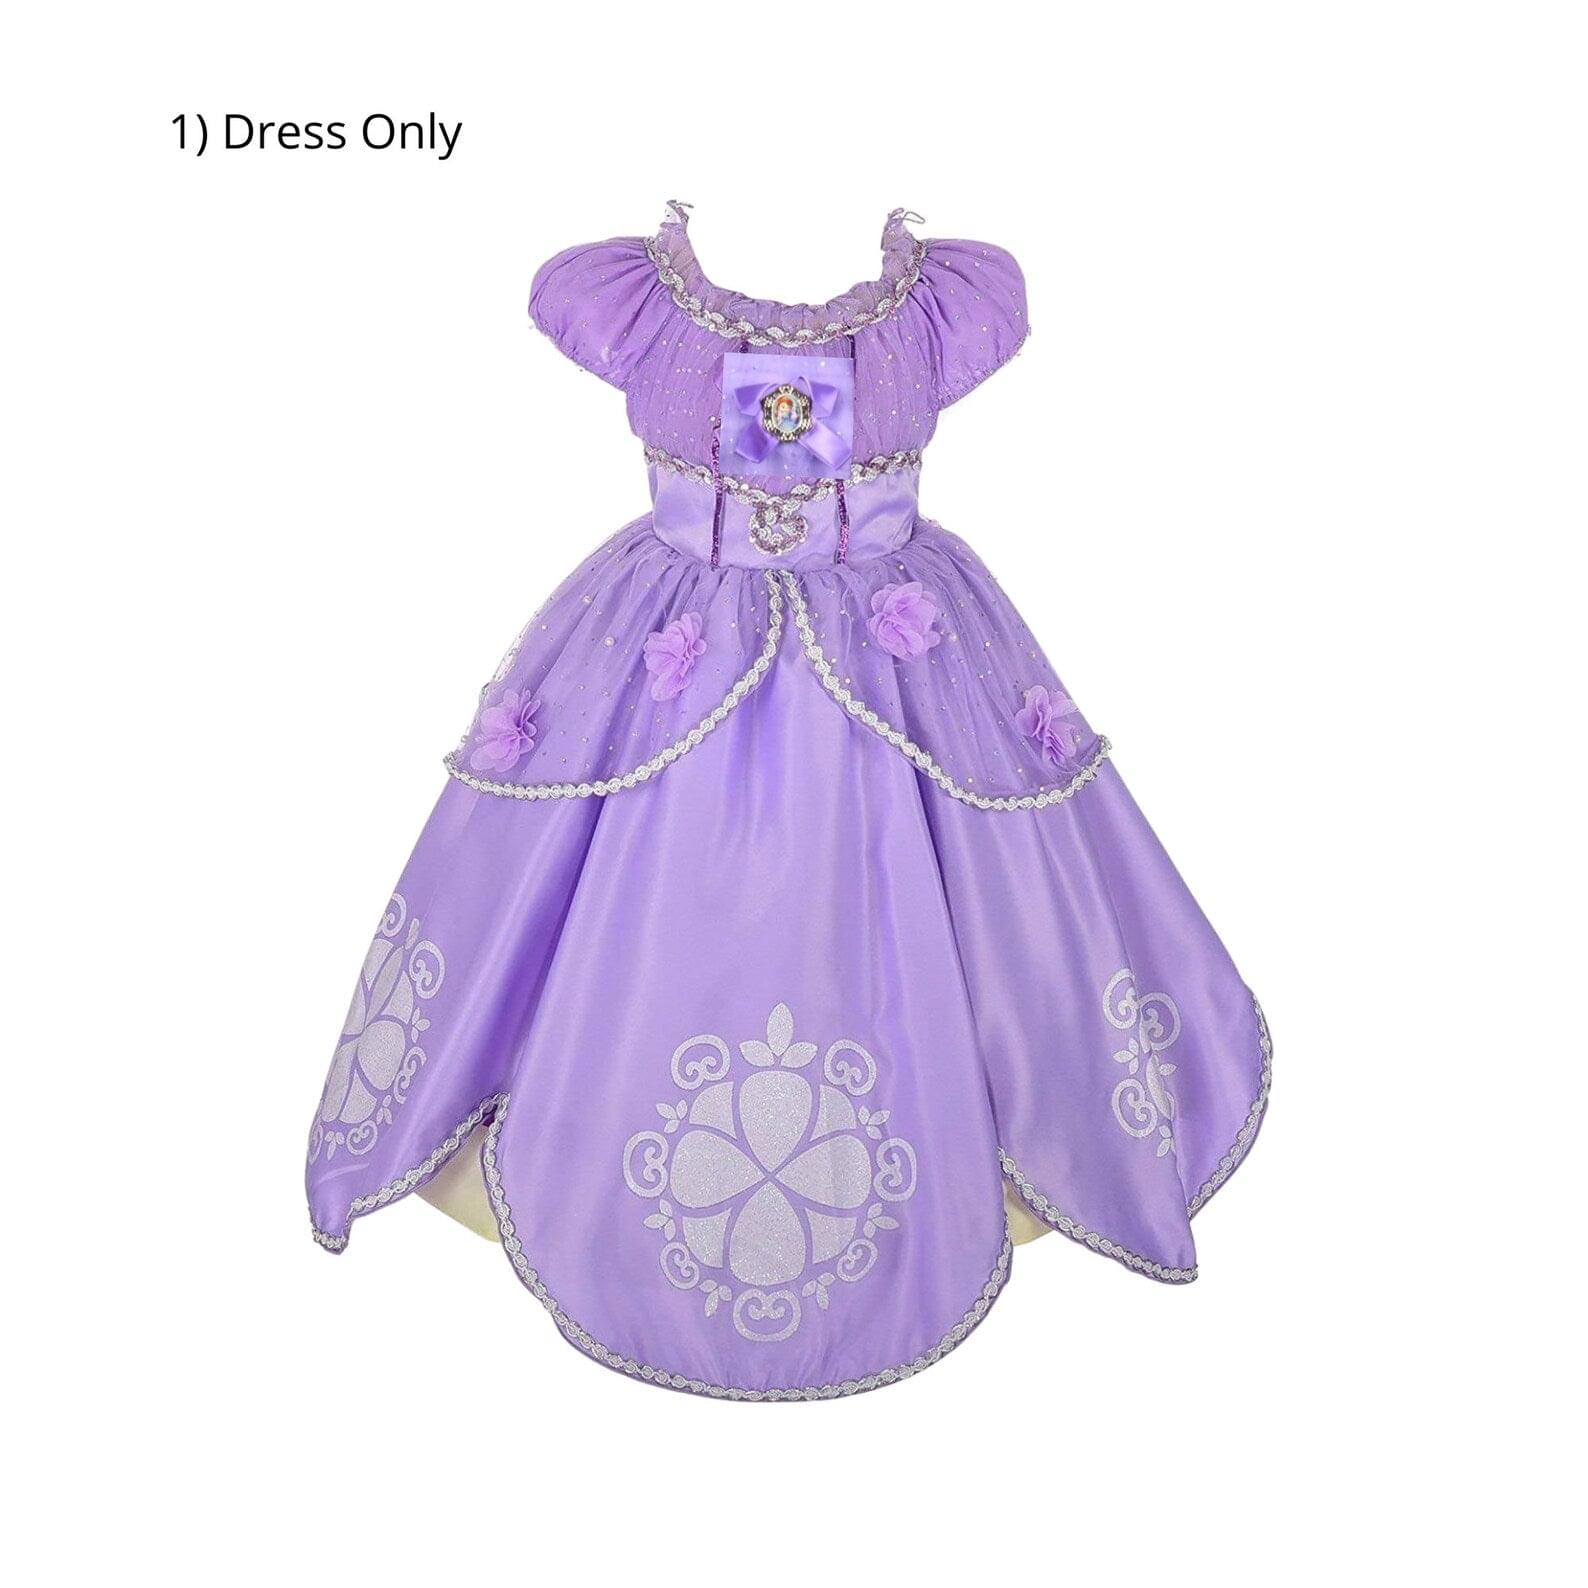 Disney-Inspired Sofia the First Birthday Dress for Little Princesses Dress Only